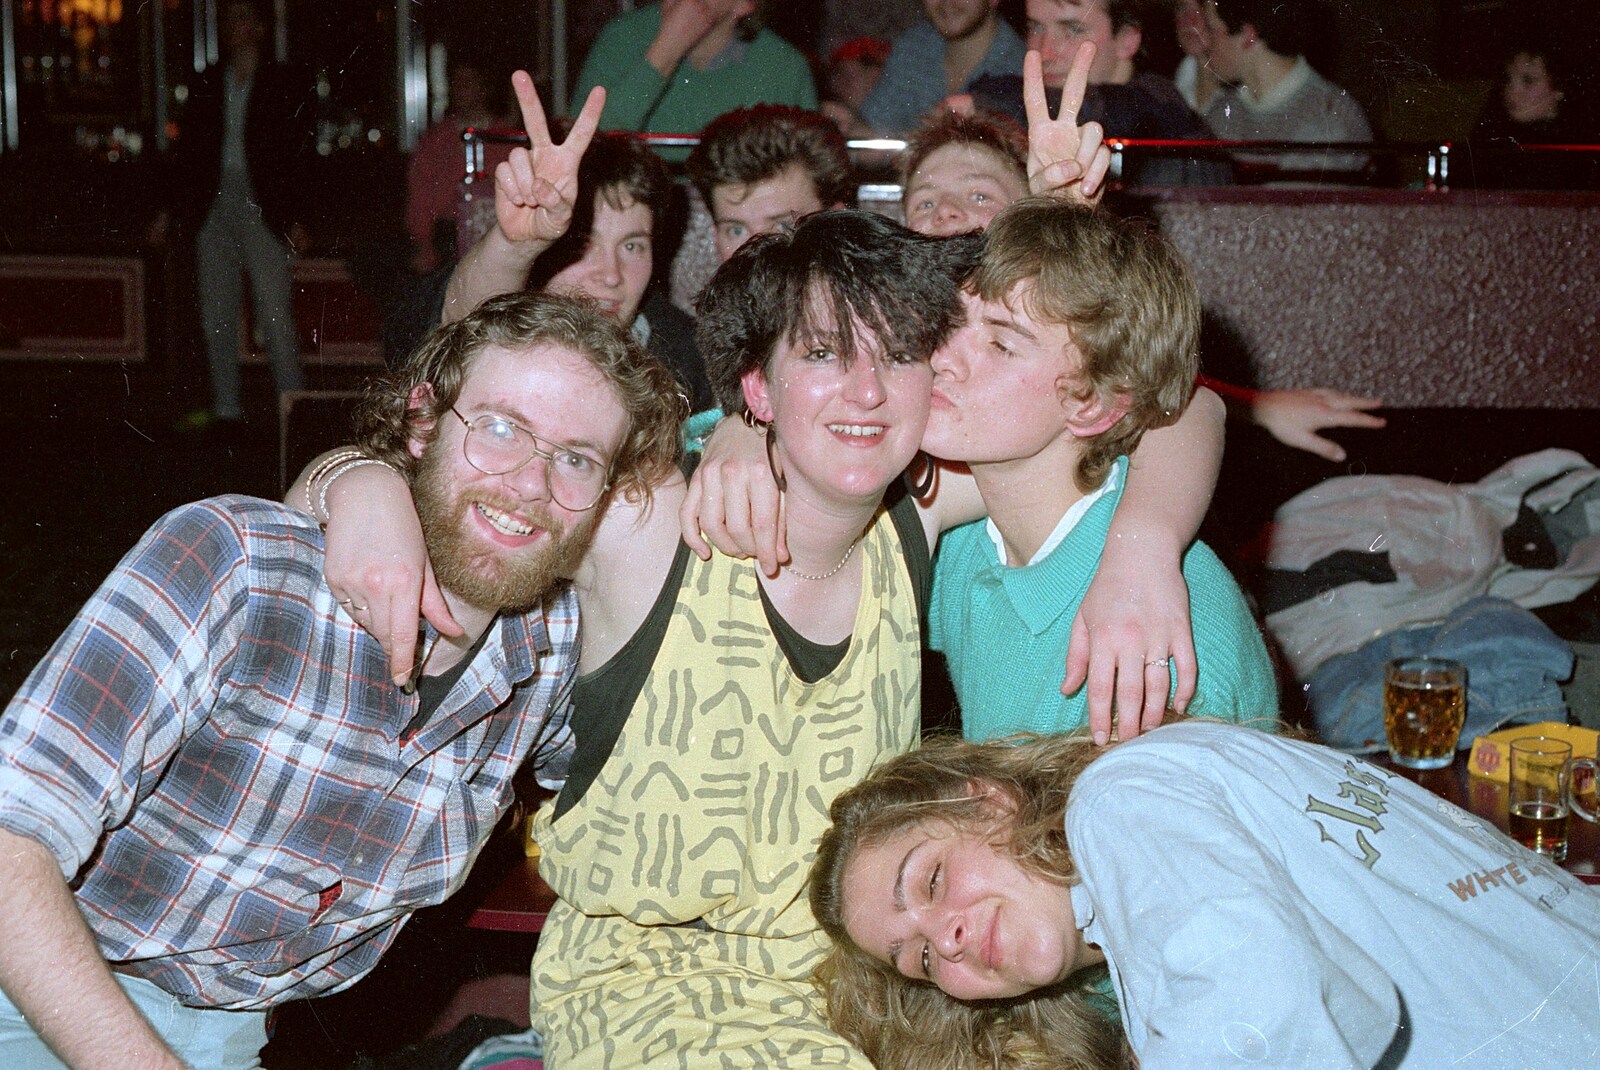 Lots of rabbit ears from Uni: A Party in Snobs Nightclub, Mayflower Street, Plymouth - 18th October 1986